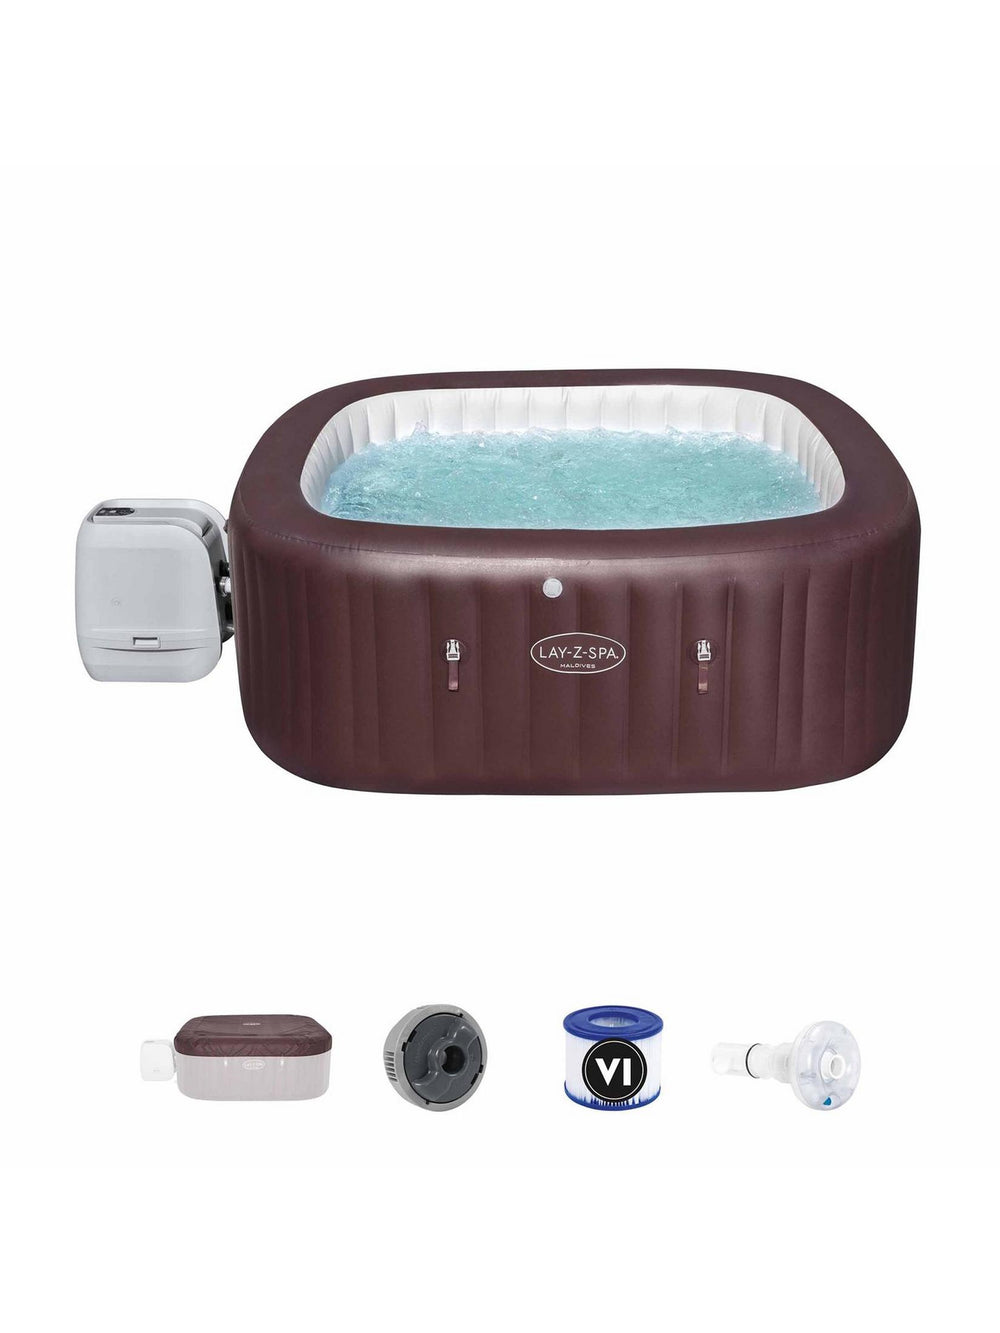 Lay-Z-Spa Maldives HydroJet Pro Hot Tub for 5-7 Adults